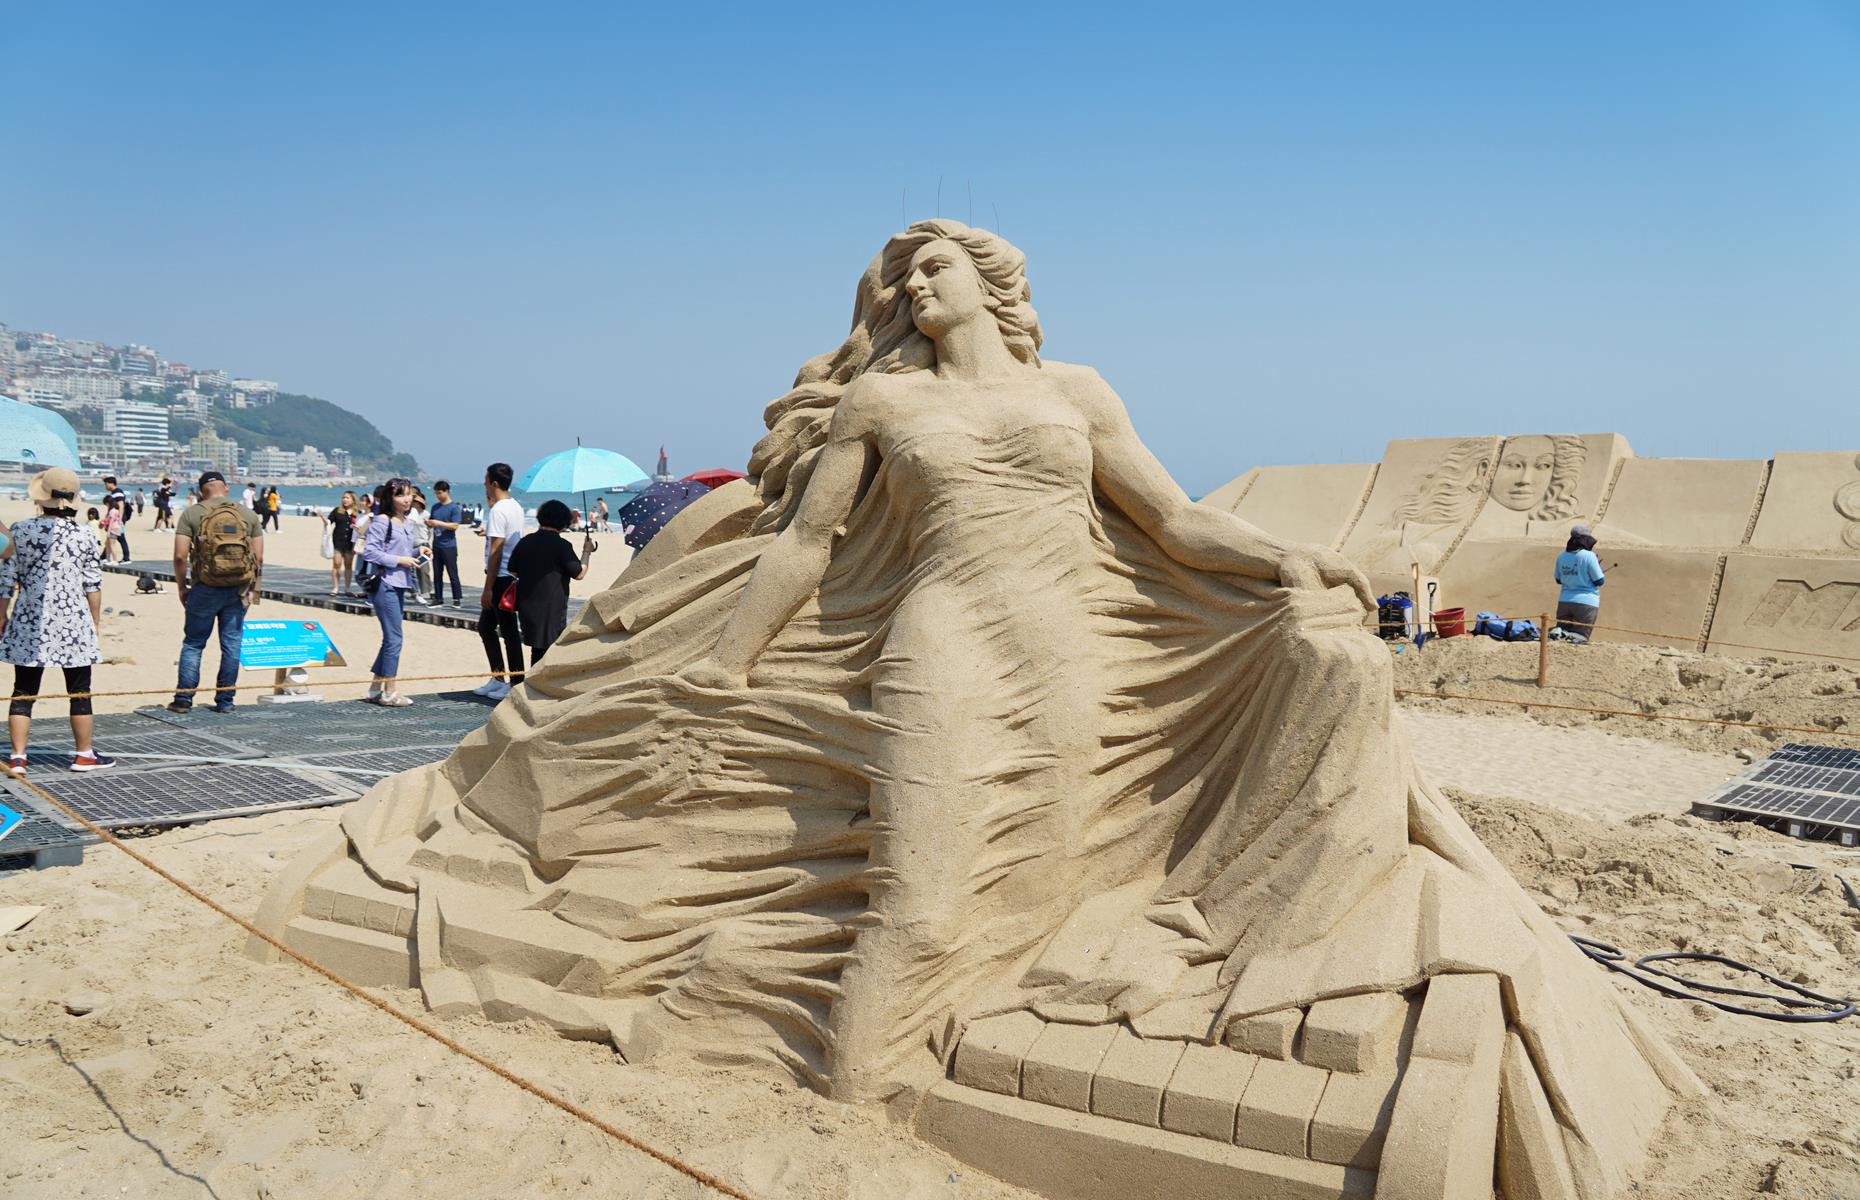 Surreal sand art takes over the sands of Busan in South Korea in May during its annual Haeundae Sand Festival which sees international artists get to work on Haeundae Beach. This ethereal sculpture is by the artist Zuo Zhang at the 2019 festival and is called the Scent of Music. The country’s second-largest city, Busan has glorious sandy beaches, perfect for making sandcastles and it's hoped the event can return in 2022.